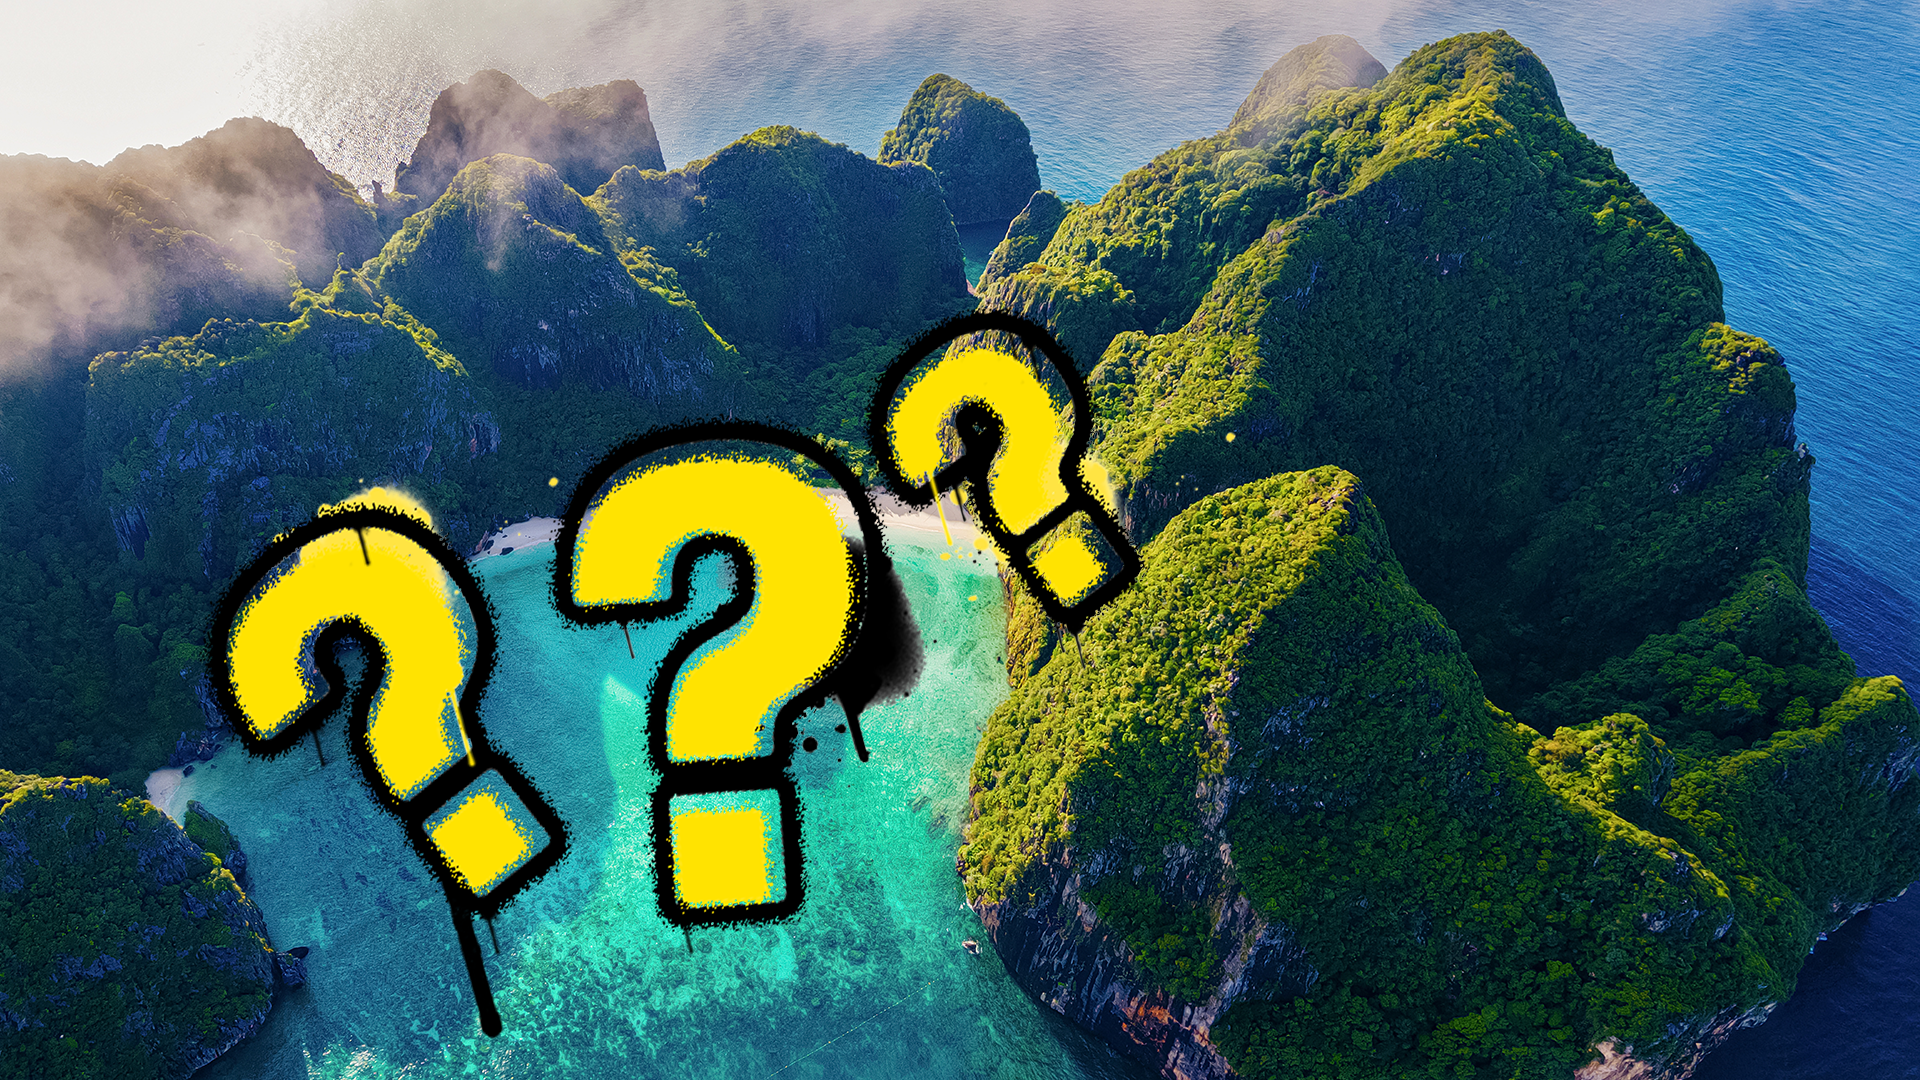 A tropical island with question marks